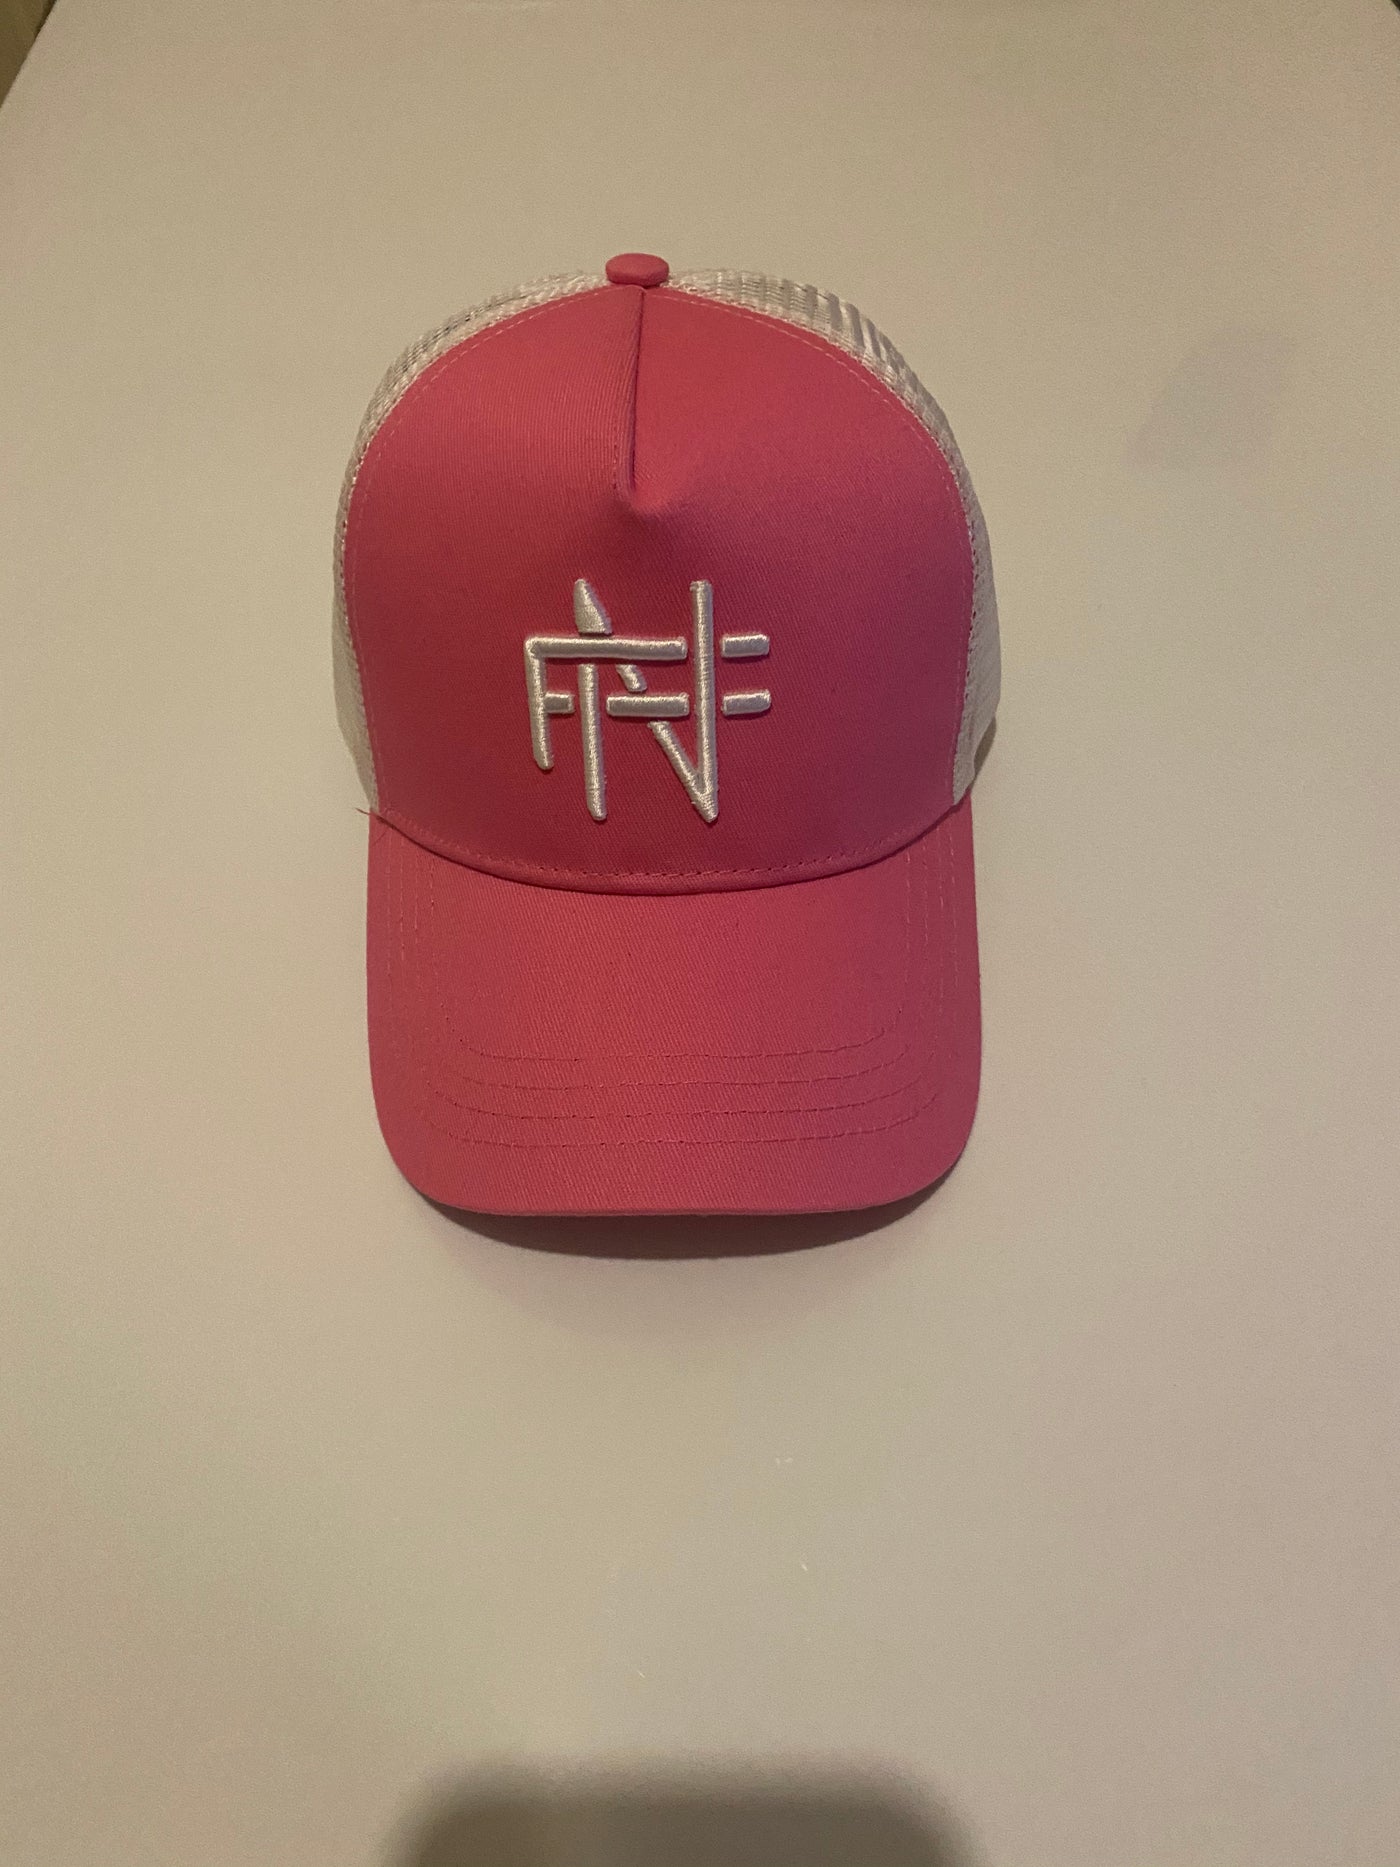 mens tracksuit sale | FN Cap Pink & White | Fashionable Baseball Cap for a Playful Look